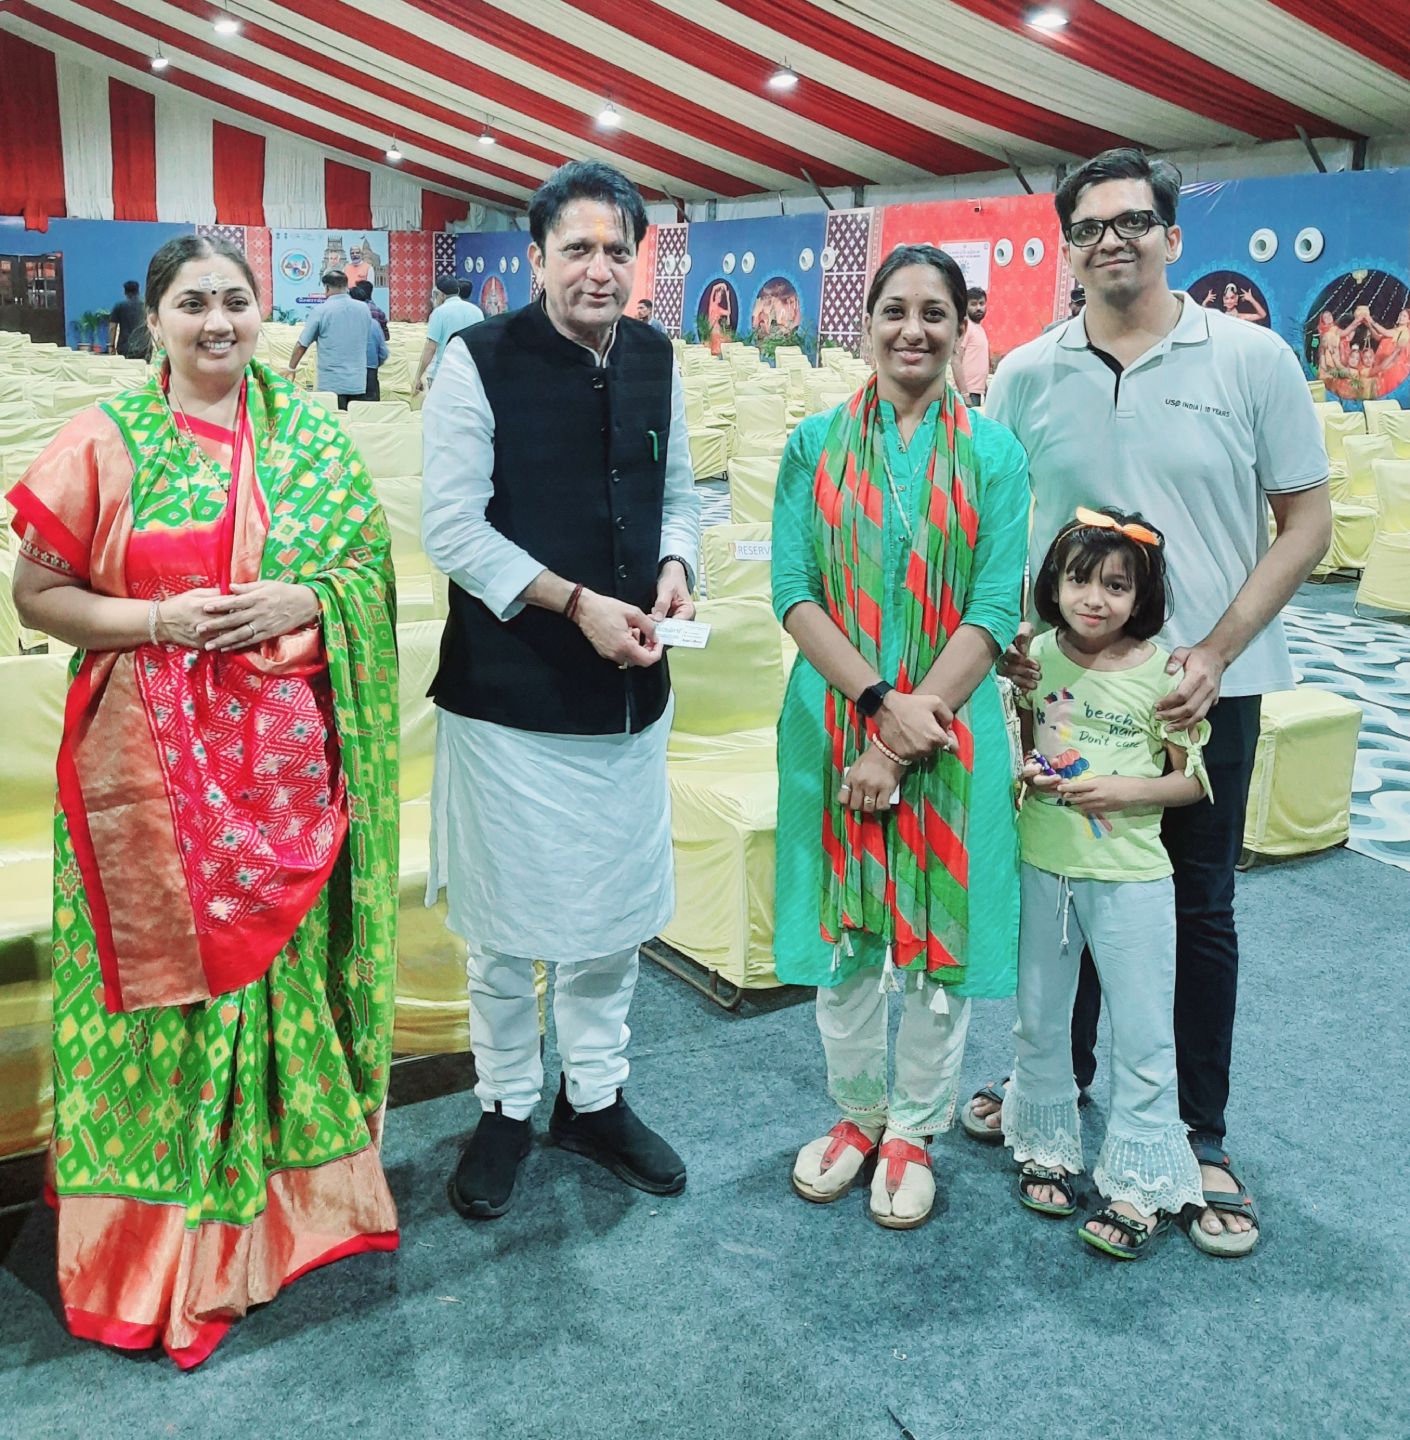 Had the opportunity to meet Shri Balwantsinhji Rajput; honorable minister of Commerce, trade and industry and Smt. Bhanuben Babariyaji, minister of women and child development Gujarat